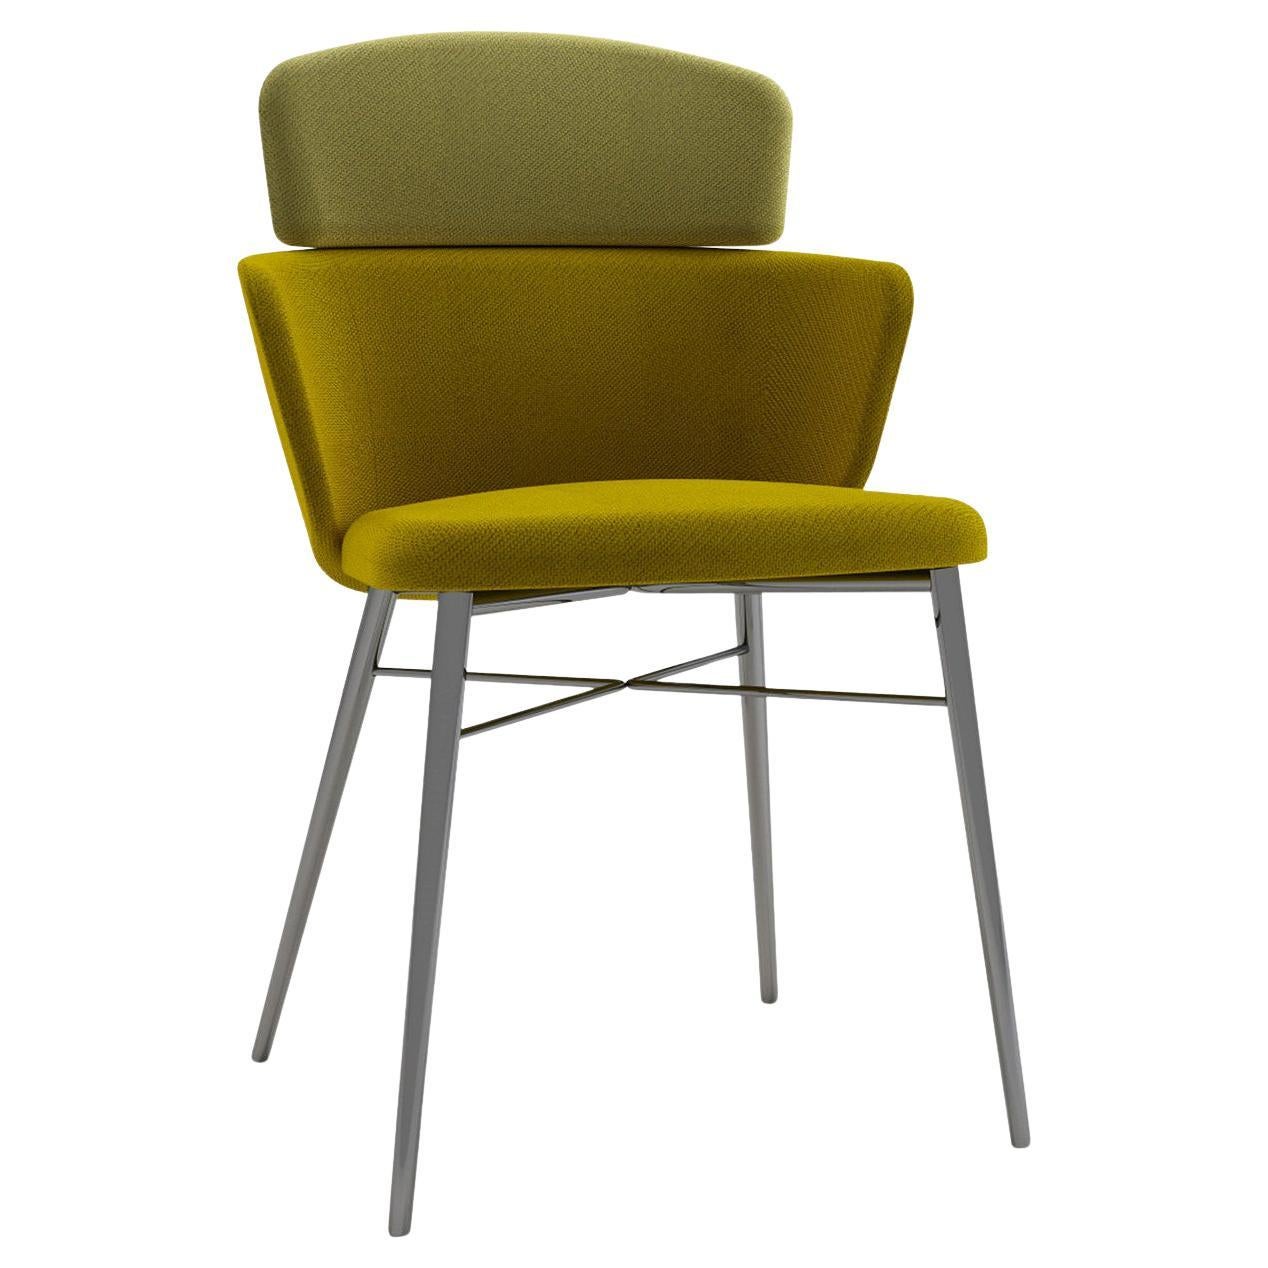 Kin Green Chair with Amrests by Radice Orlandini For Sale